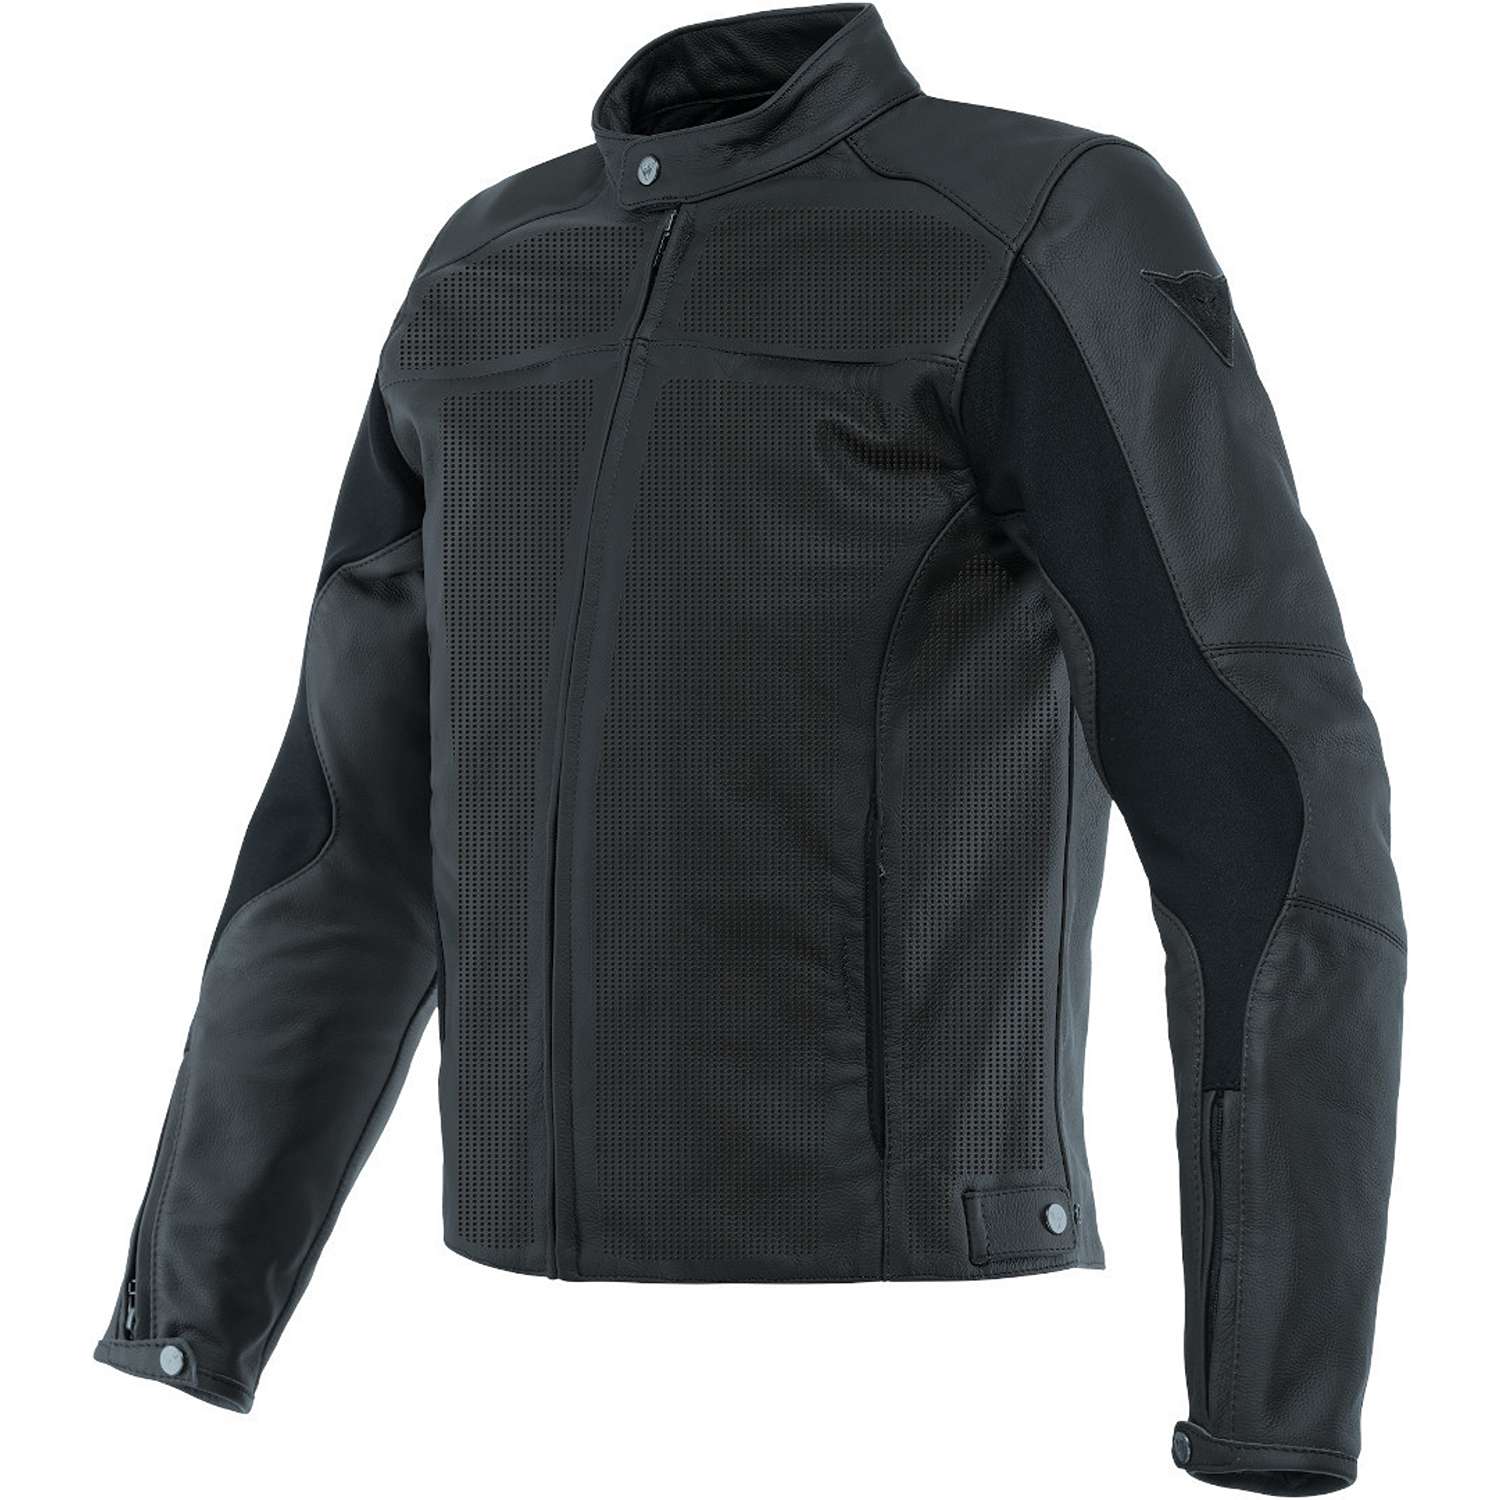 Image of EU Dainese Razon 2 Perf Leather Jacket Black Taille 56